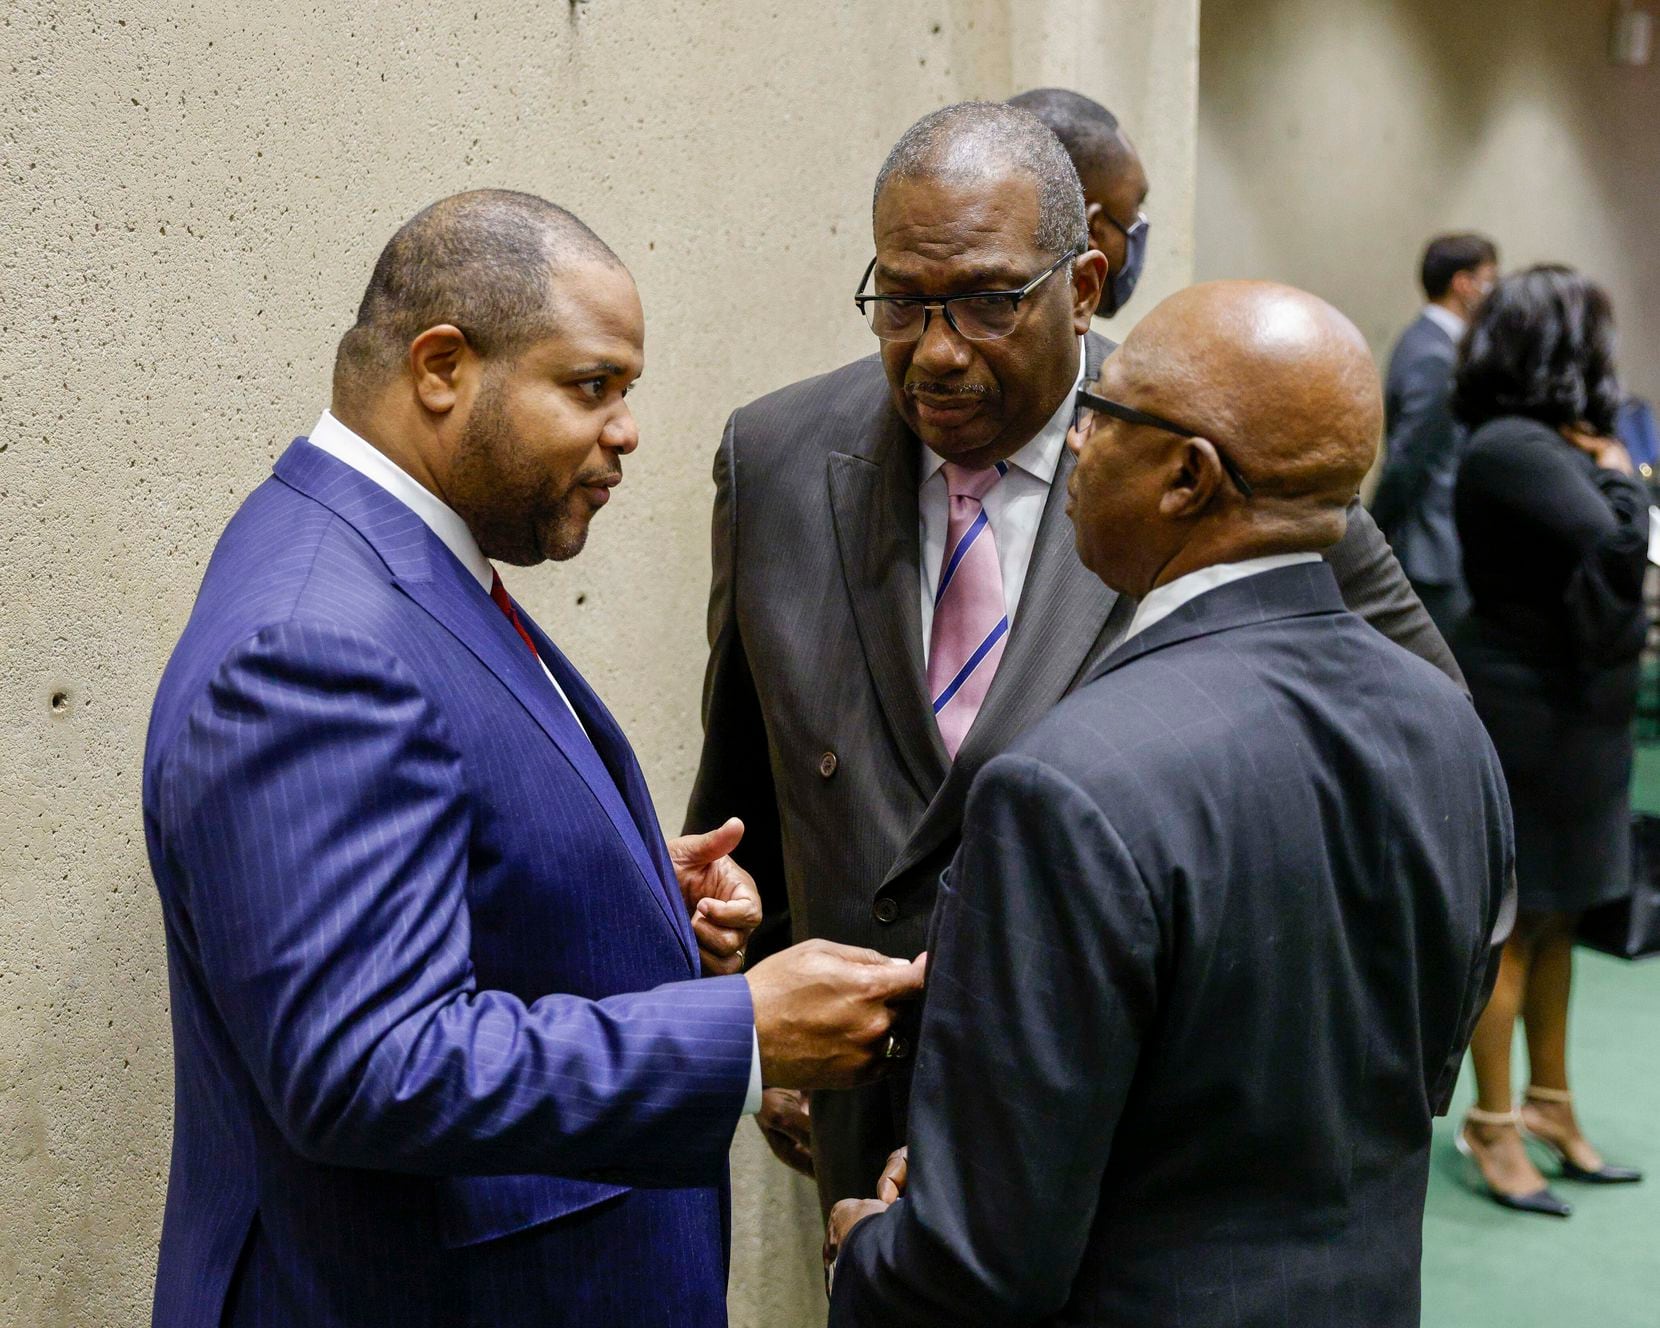 Dallas Mayor Eric Johnson (left) speaks with state Sen. Royce West (center) and council member Tennell Atkins after his state of the city address at City Hall in Dallas on Wednesday, Nov. 17, 2021. (Elias Valverde II/The Dallas Morning News)